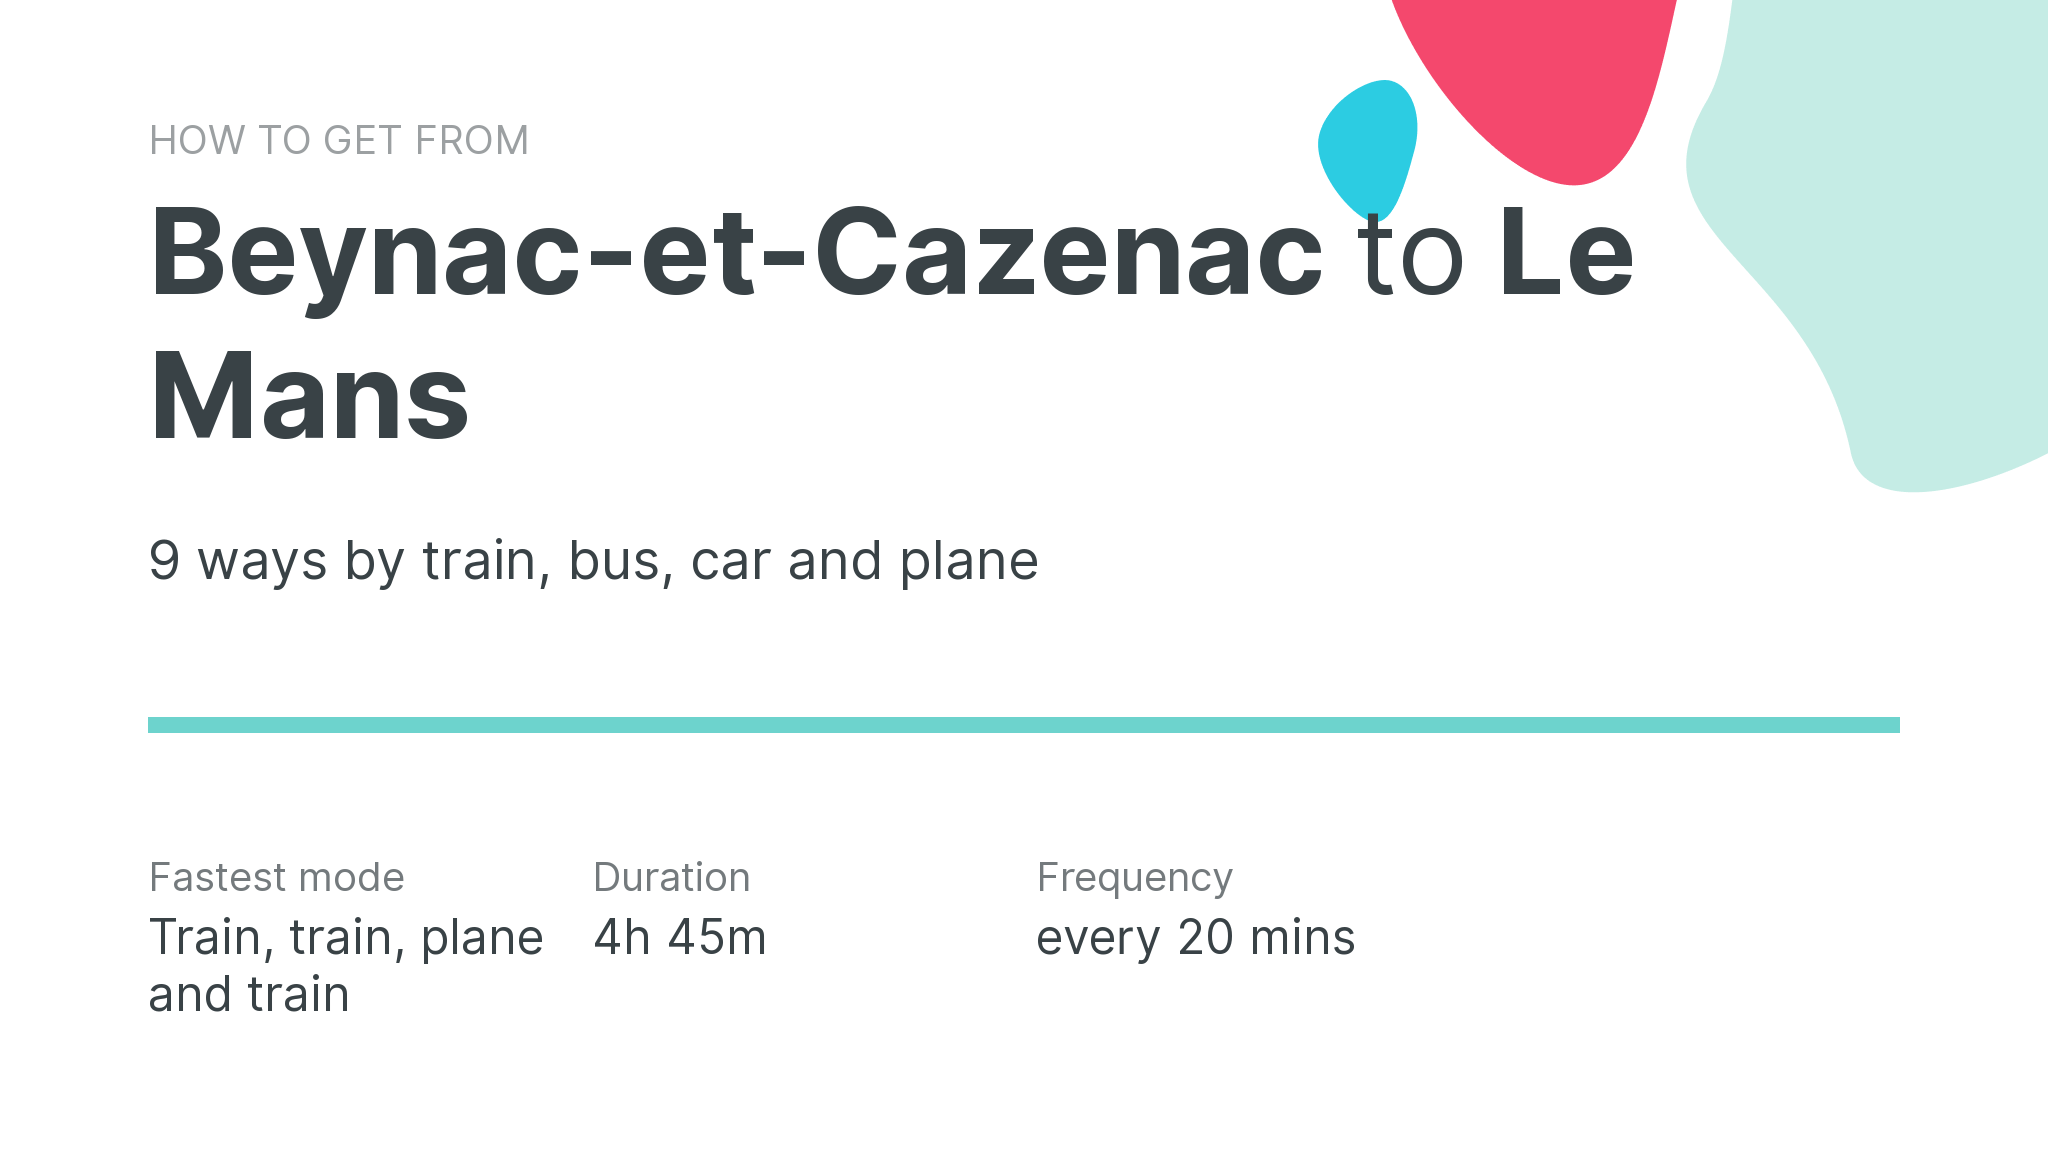 How do I get from Beynac-et-Cazenac to Le Mans